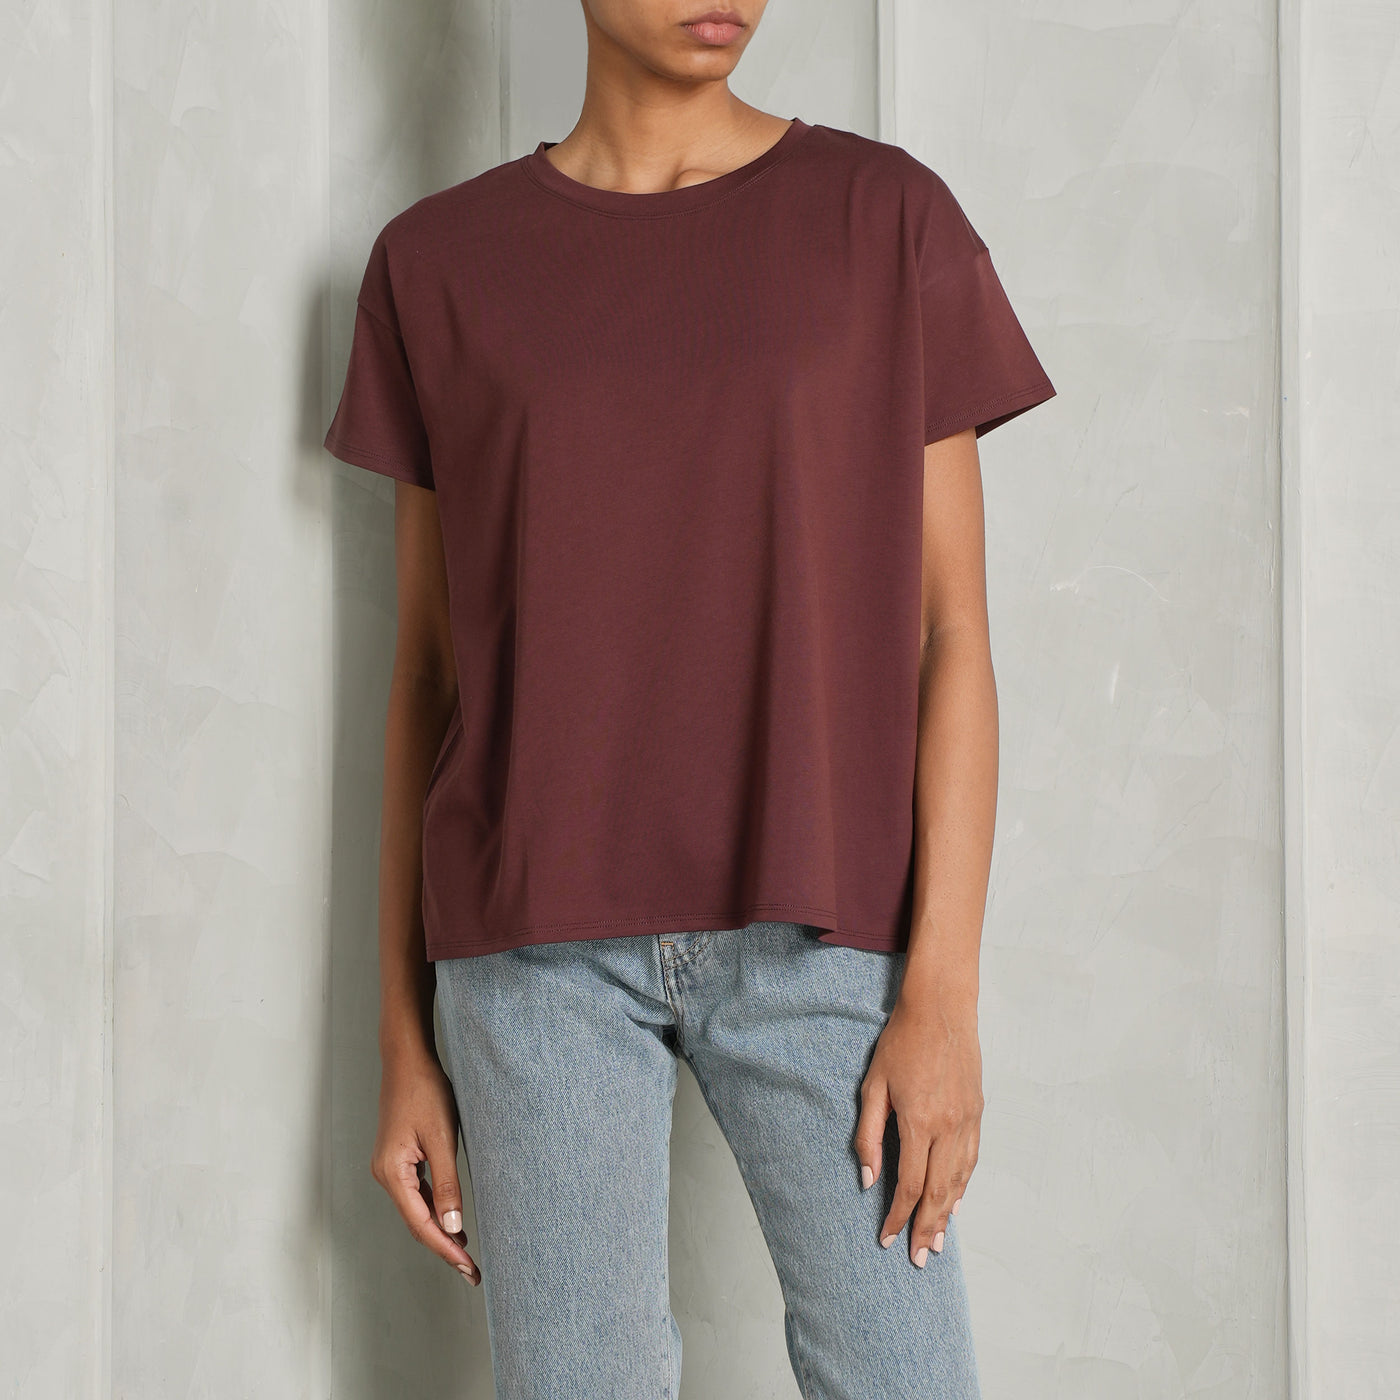 Oversized T-shirt by LOULOU STUDIO